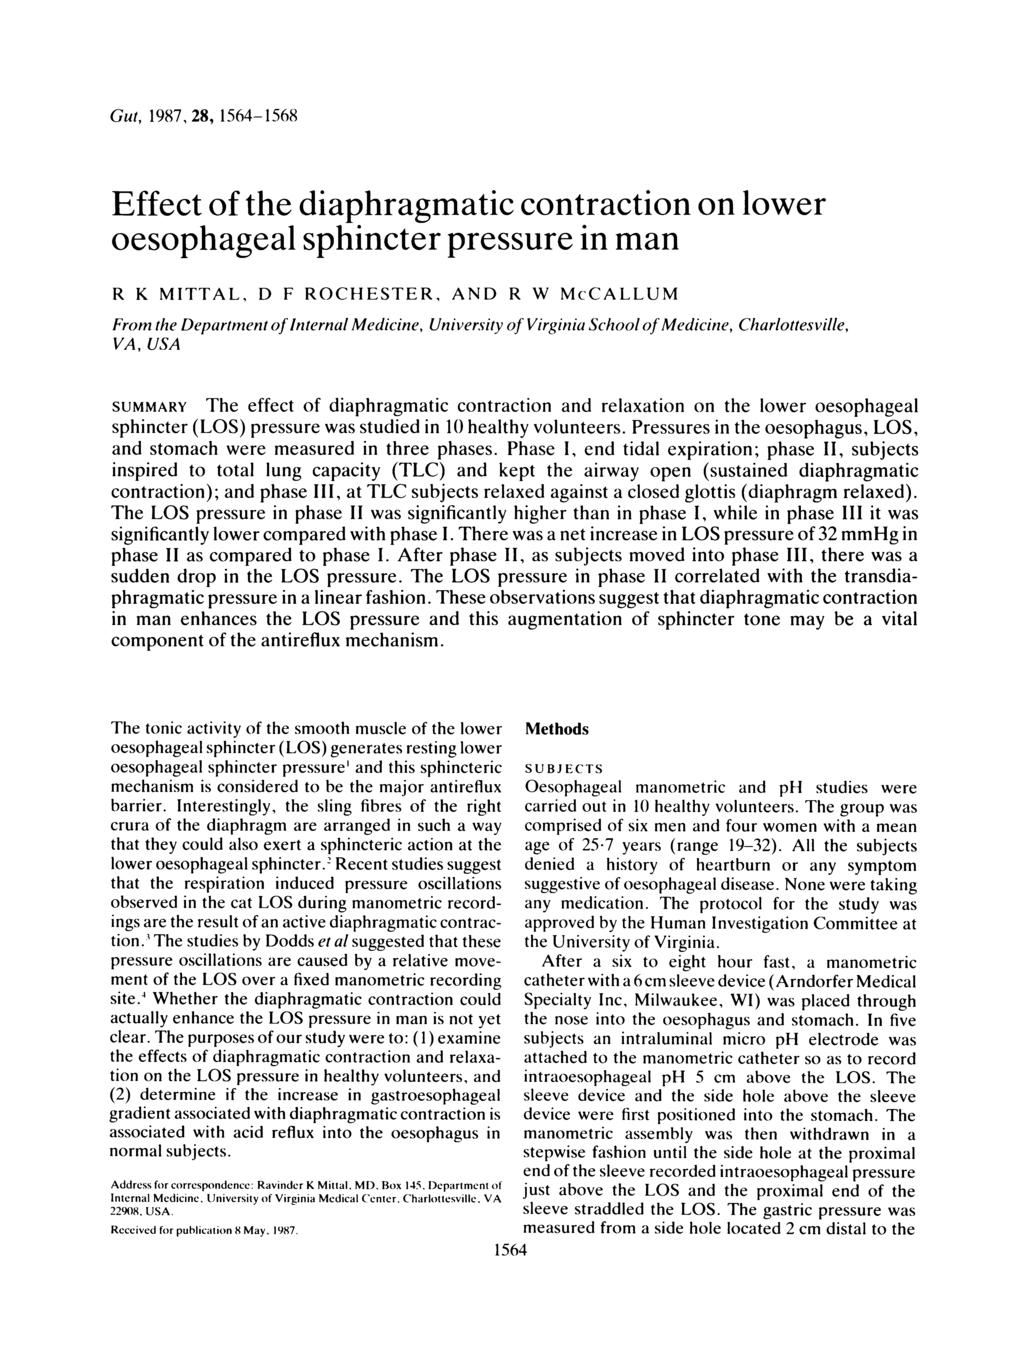 Gut, 1987, 28, 1564-1568 Effect of the diaphragmatic contraction on lower oesophageal sphincter pressure in man R K MITTAL, D F ROCHESTER, AND R W McCALLUM From the Department of Internal Medicine,